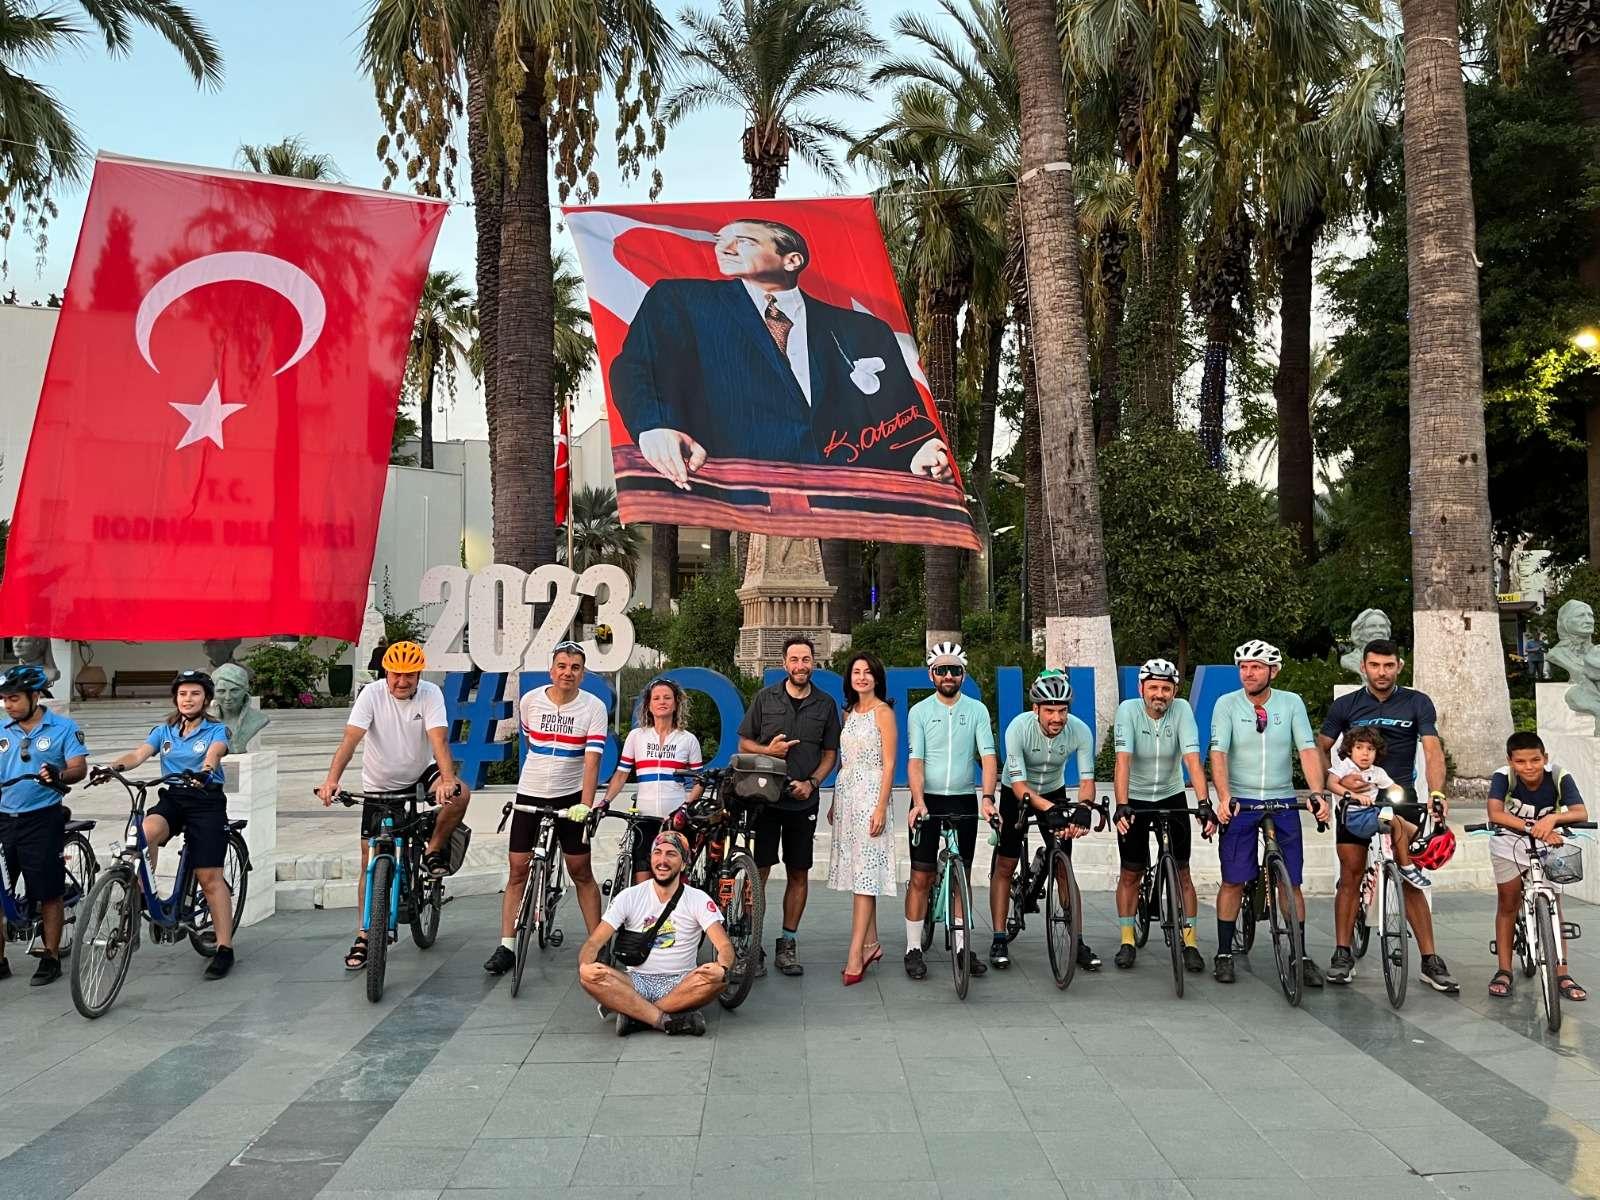 ‘EUROPEAN MOBILITY WEEK’ ACTIVITIES BY BODRUM MUNICIPALITY